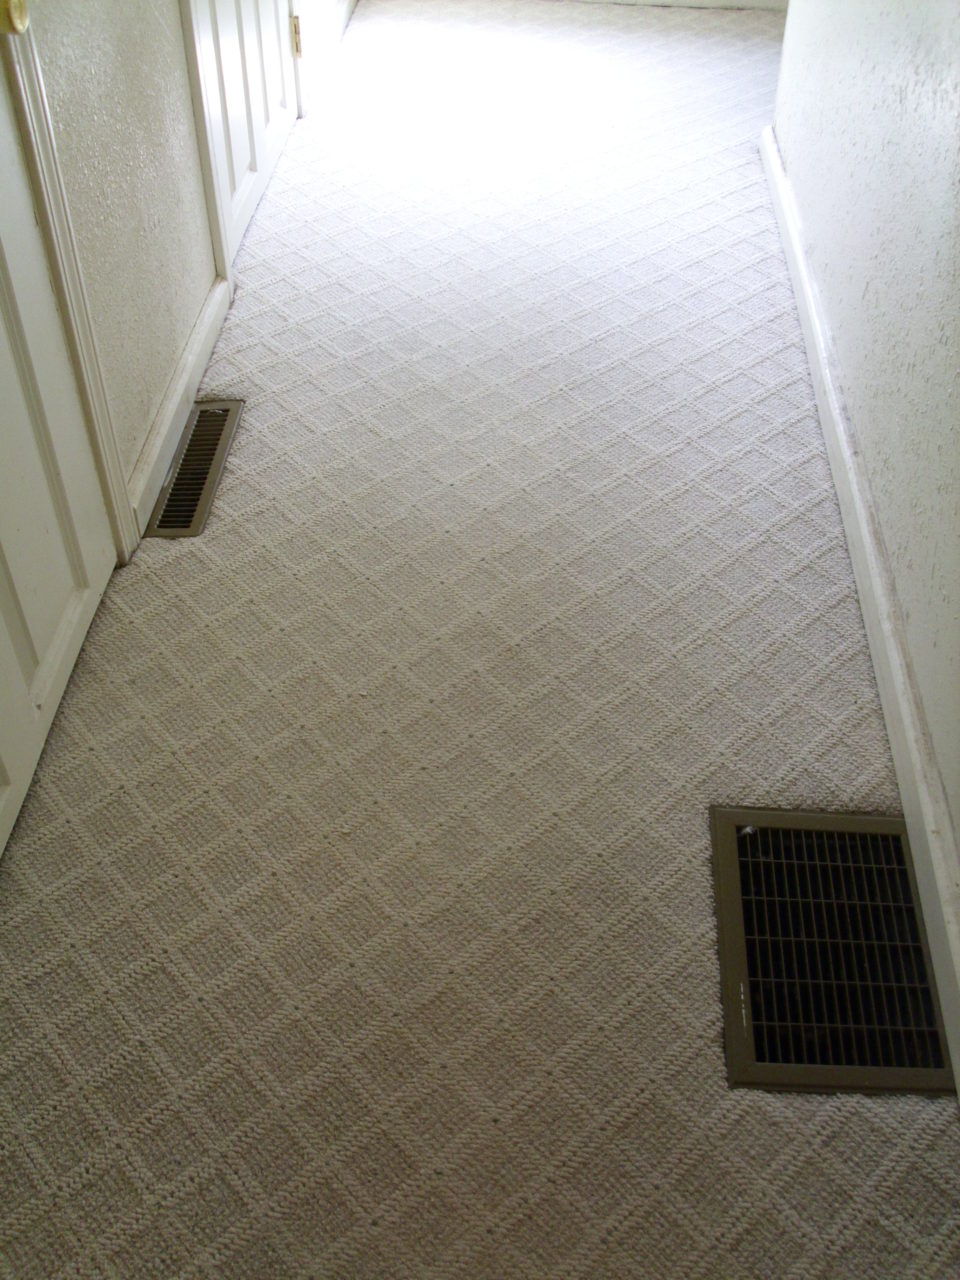 Same hallway after Heaven's Best Carpet Cleaning